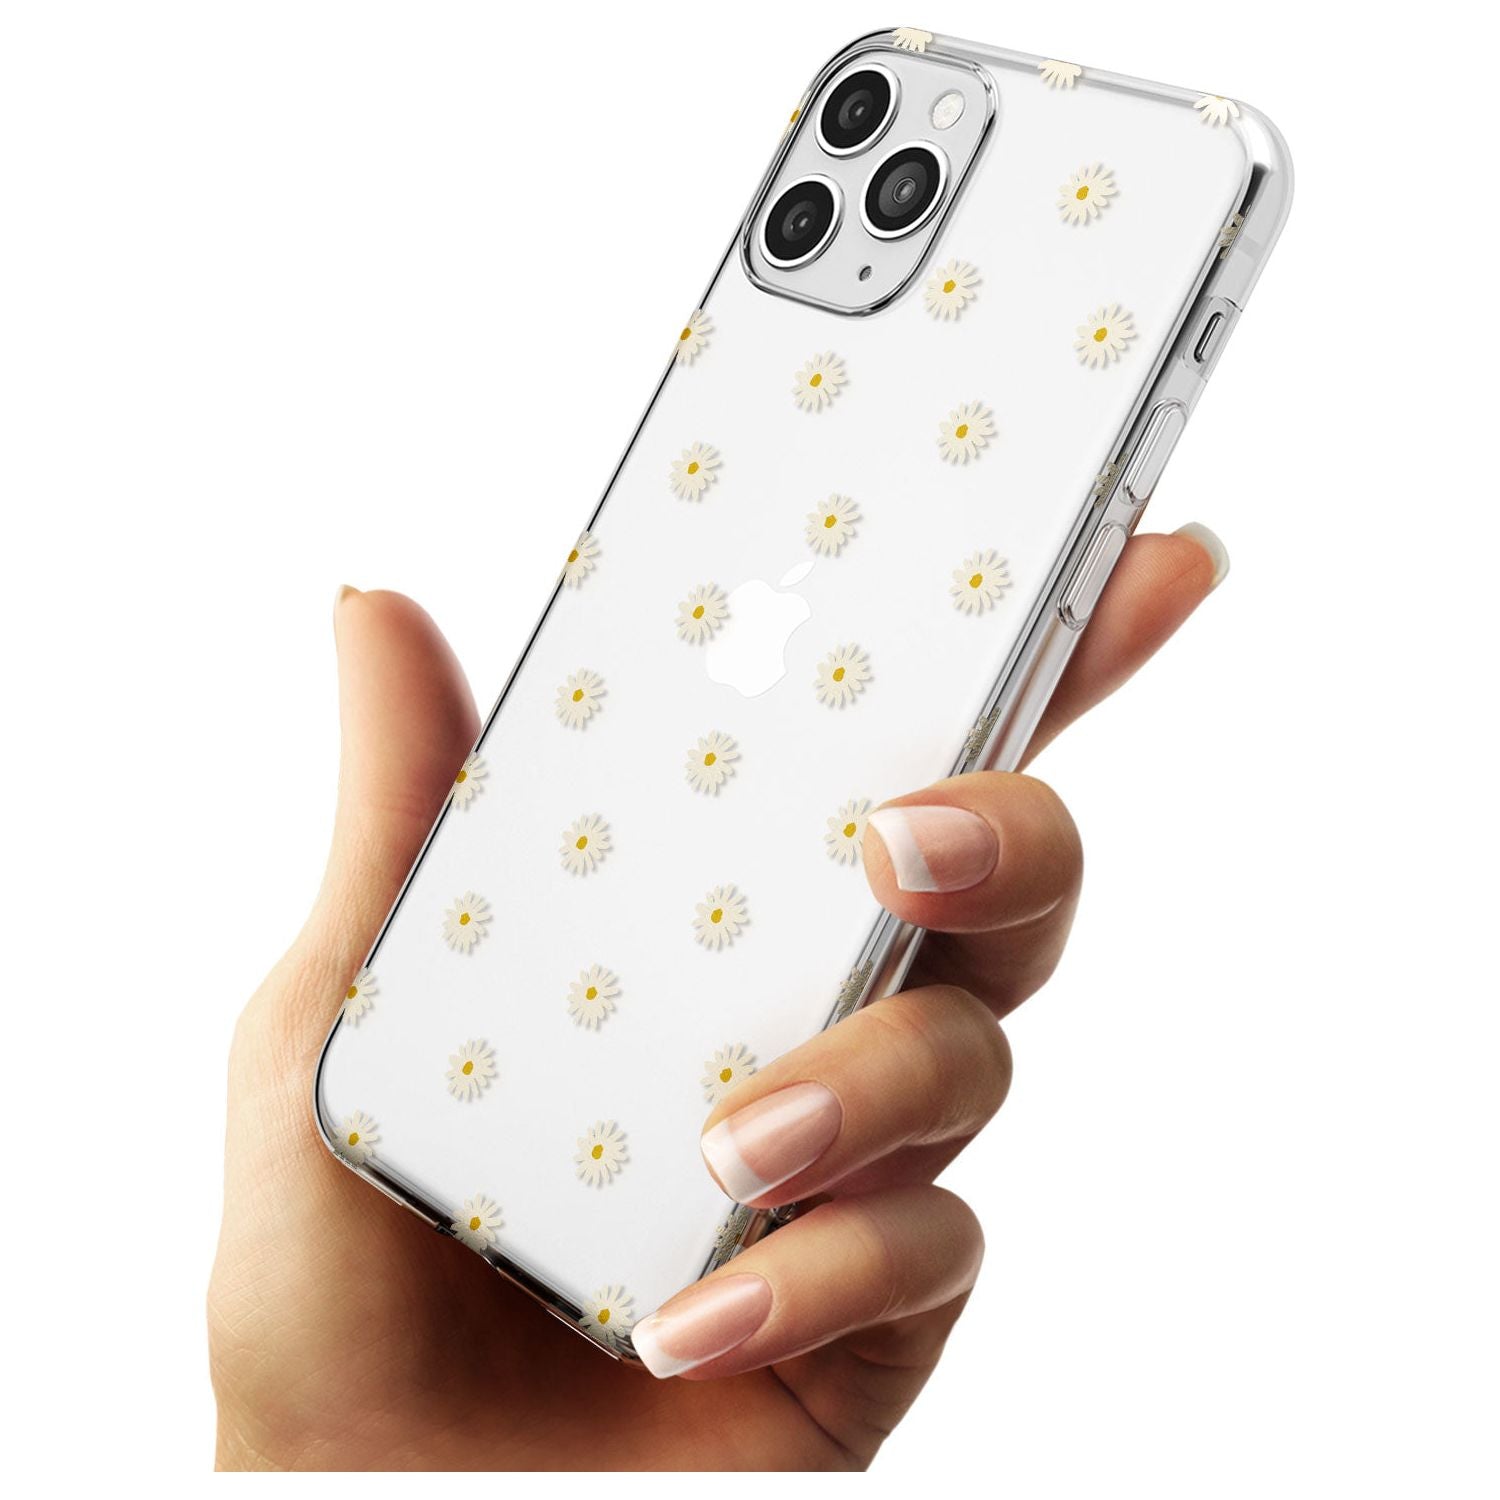 Daisy Pattern - Clear  Cute Floral Design Black Impact Phone Case for iPhone 11 Pro Max